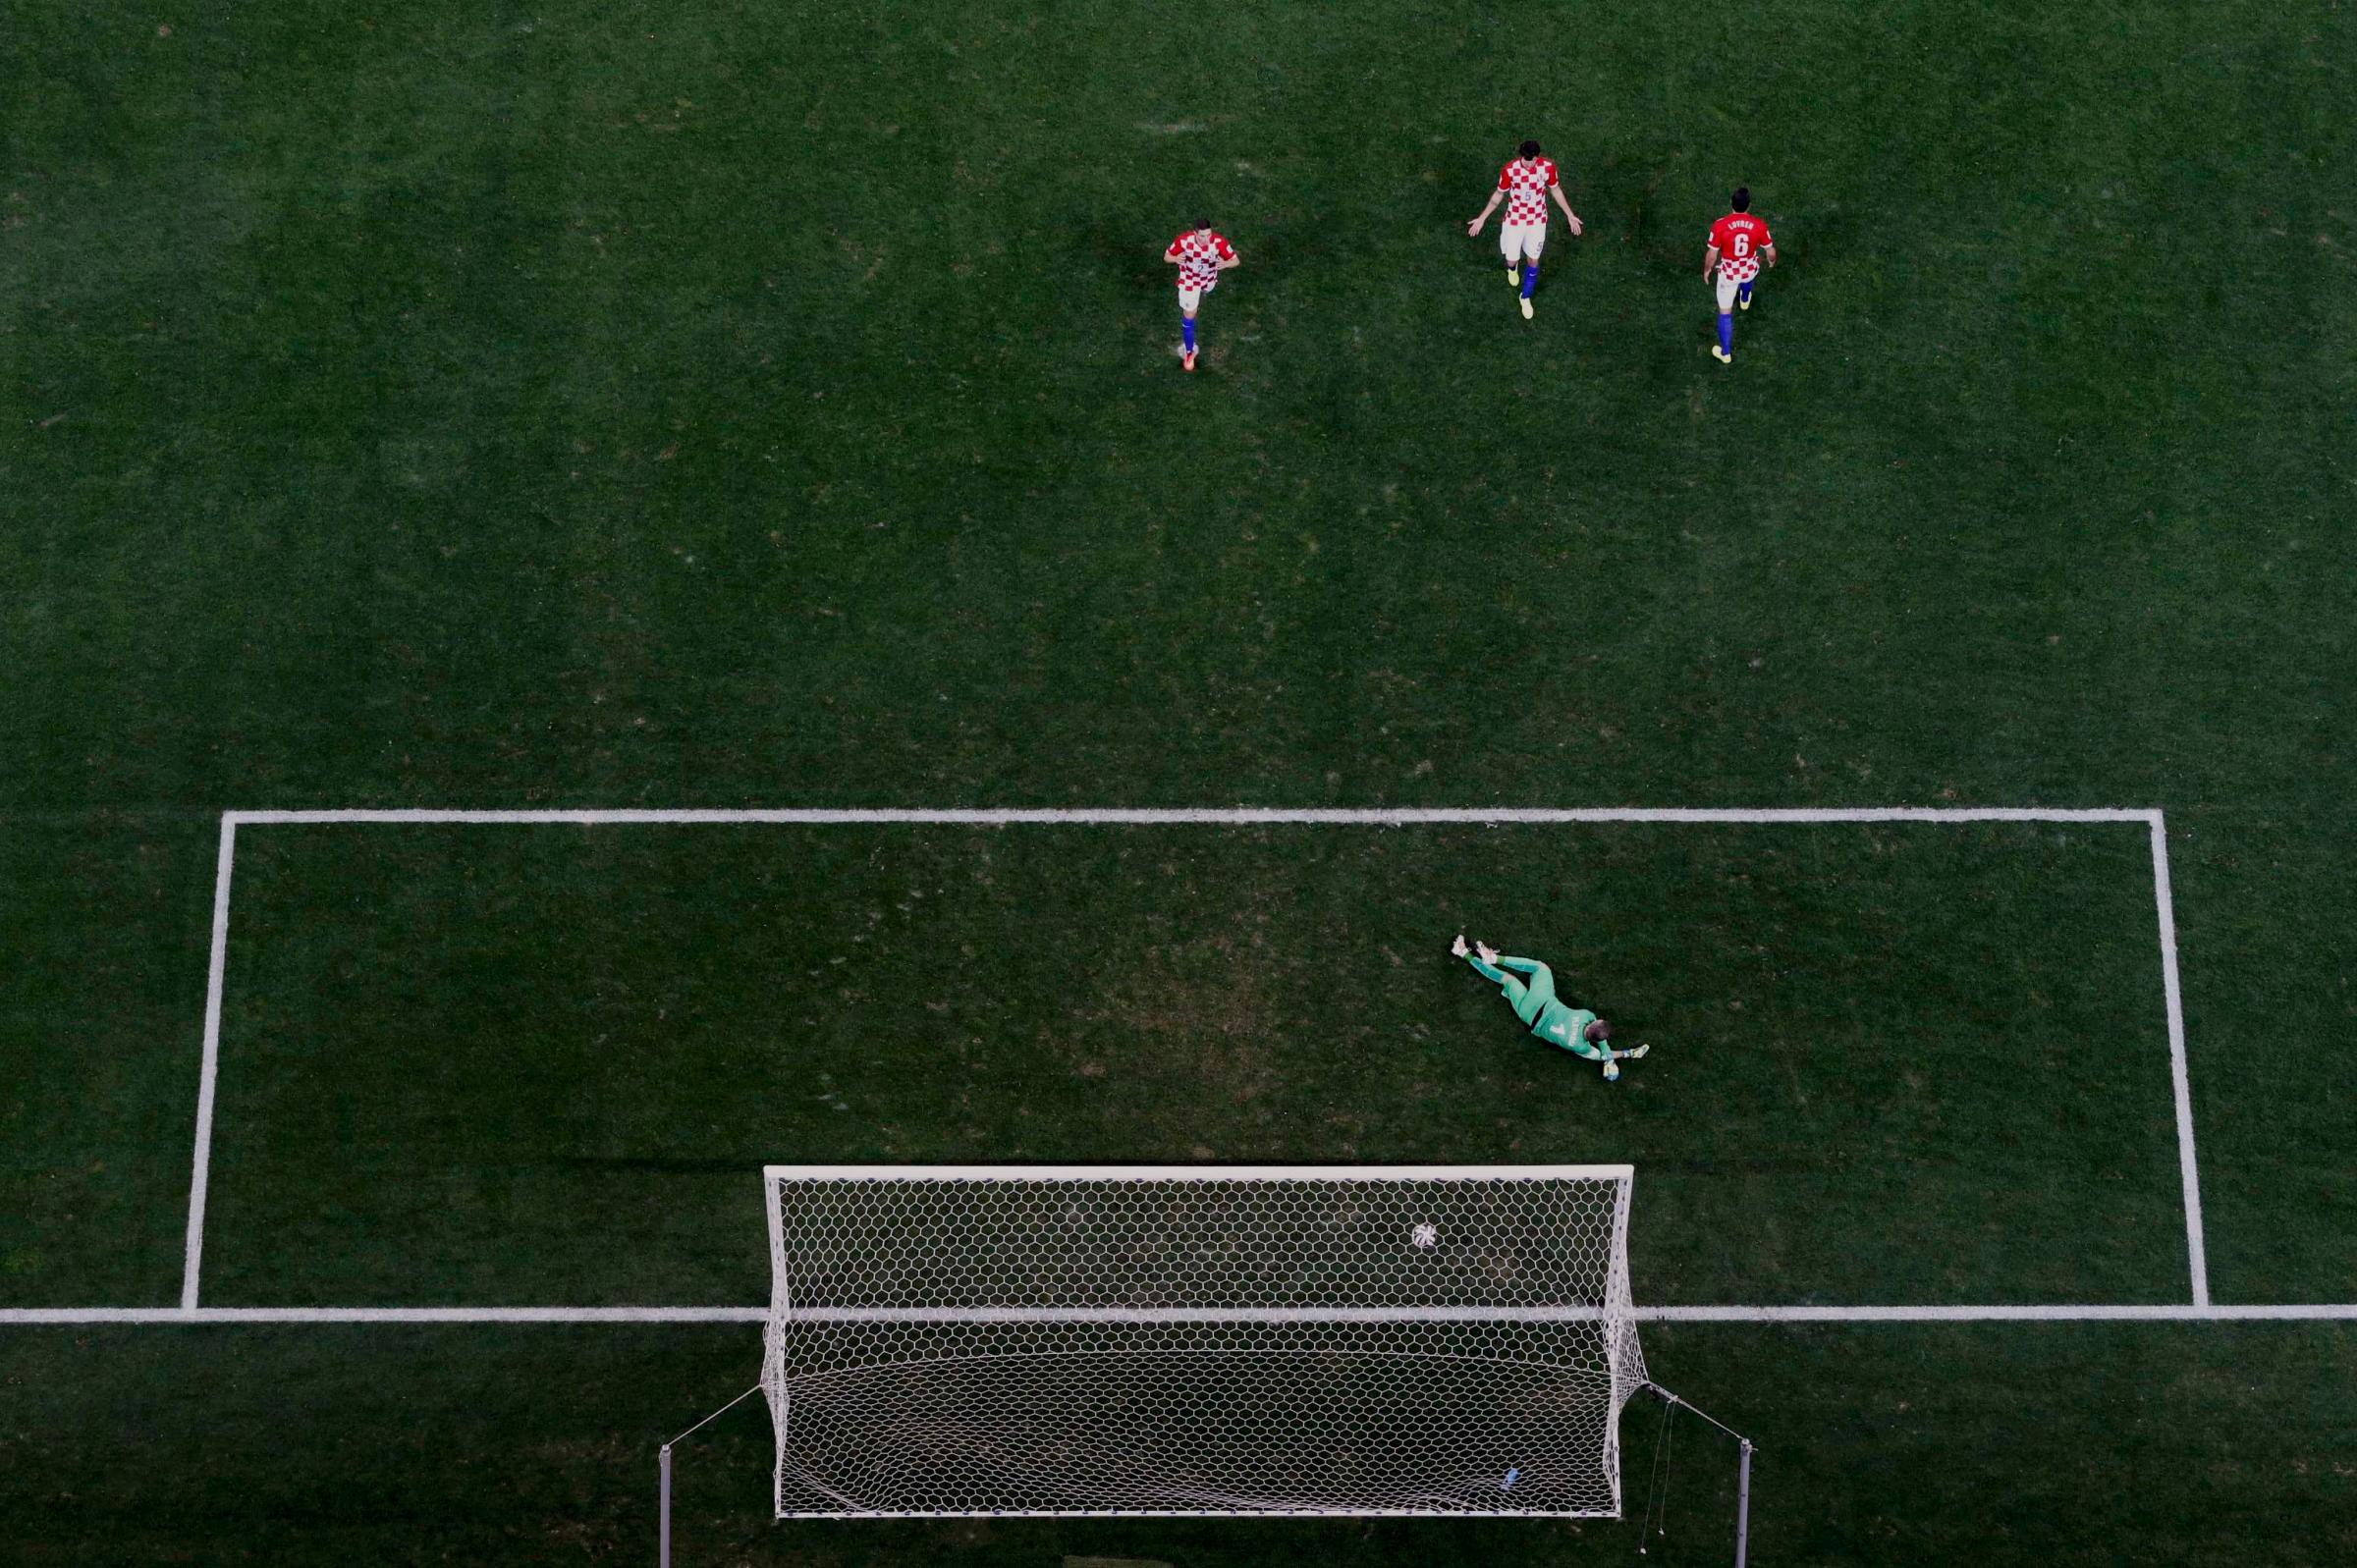 Croatia's players react after conceding a goal to Brazil's Oscar during their 2014 World Cup opening match at the Corinthians arena in Sao Paulo